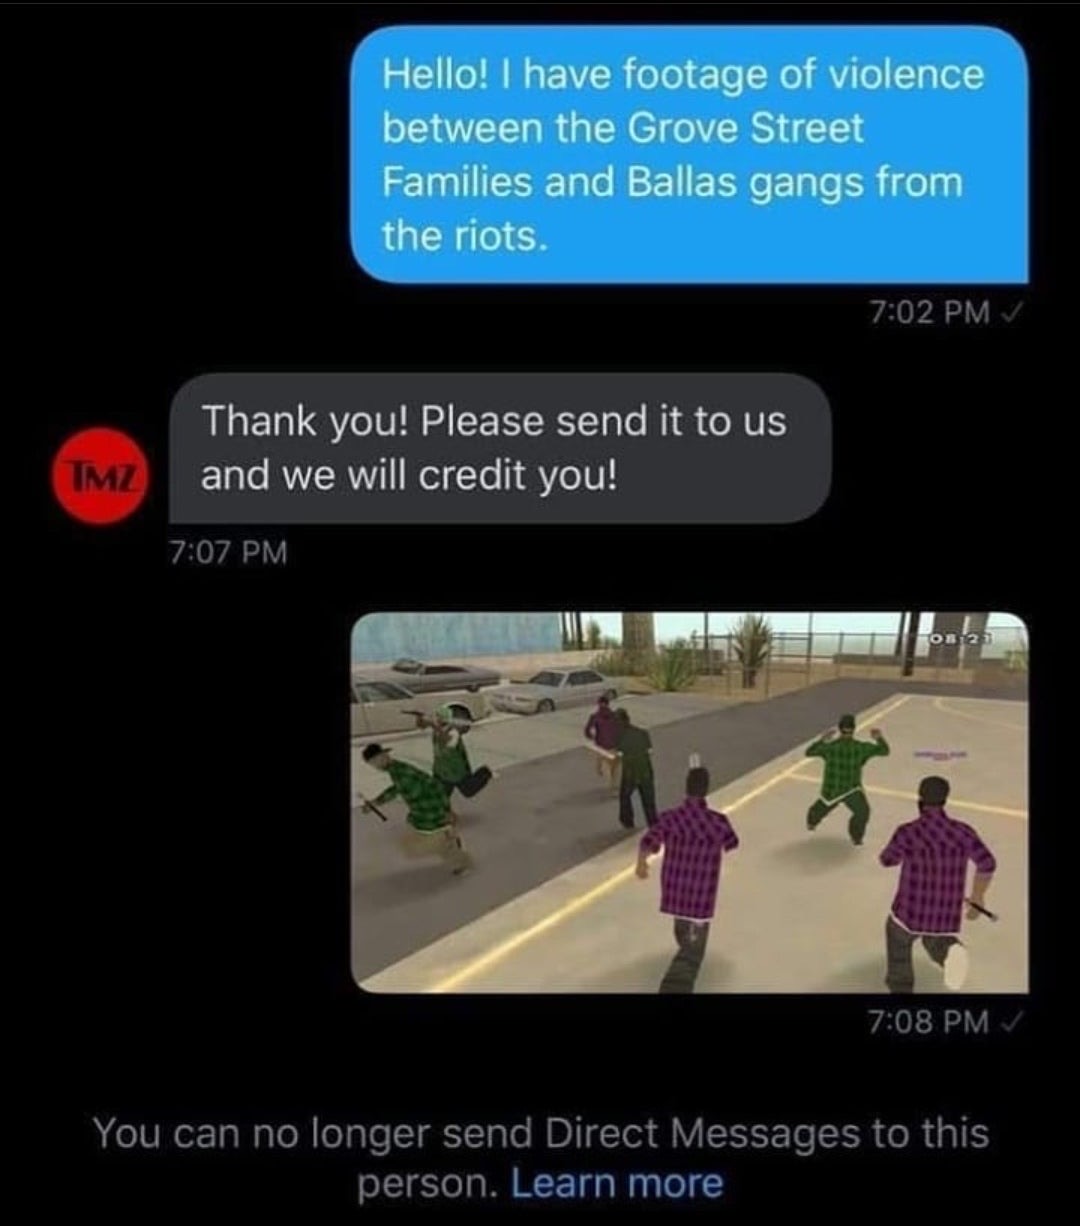 have footage of the grove street - Hello! I have footage of violence between the Grove Street Families and Ballas gangs from the riots. Thank you! Please send it to us and we will credit you! Imz Os 12 You can no longer send Direct Messages to this person